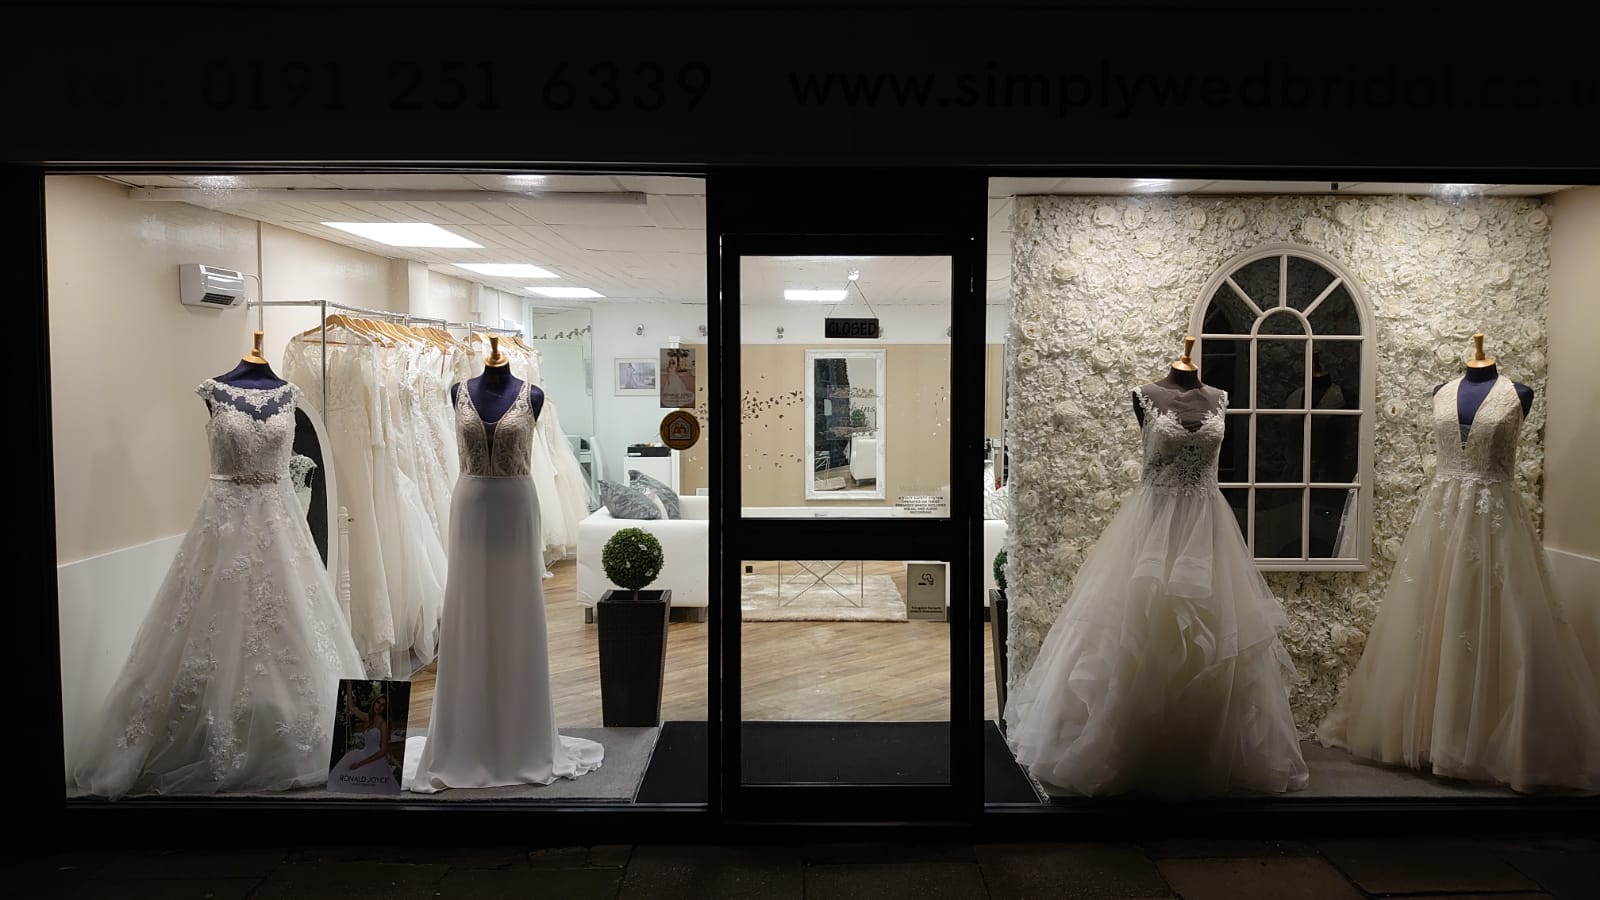 Newcastle's Simply Wed bridal shop window display lit up at night to show four ivory wedding dresses on black mannequins